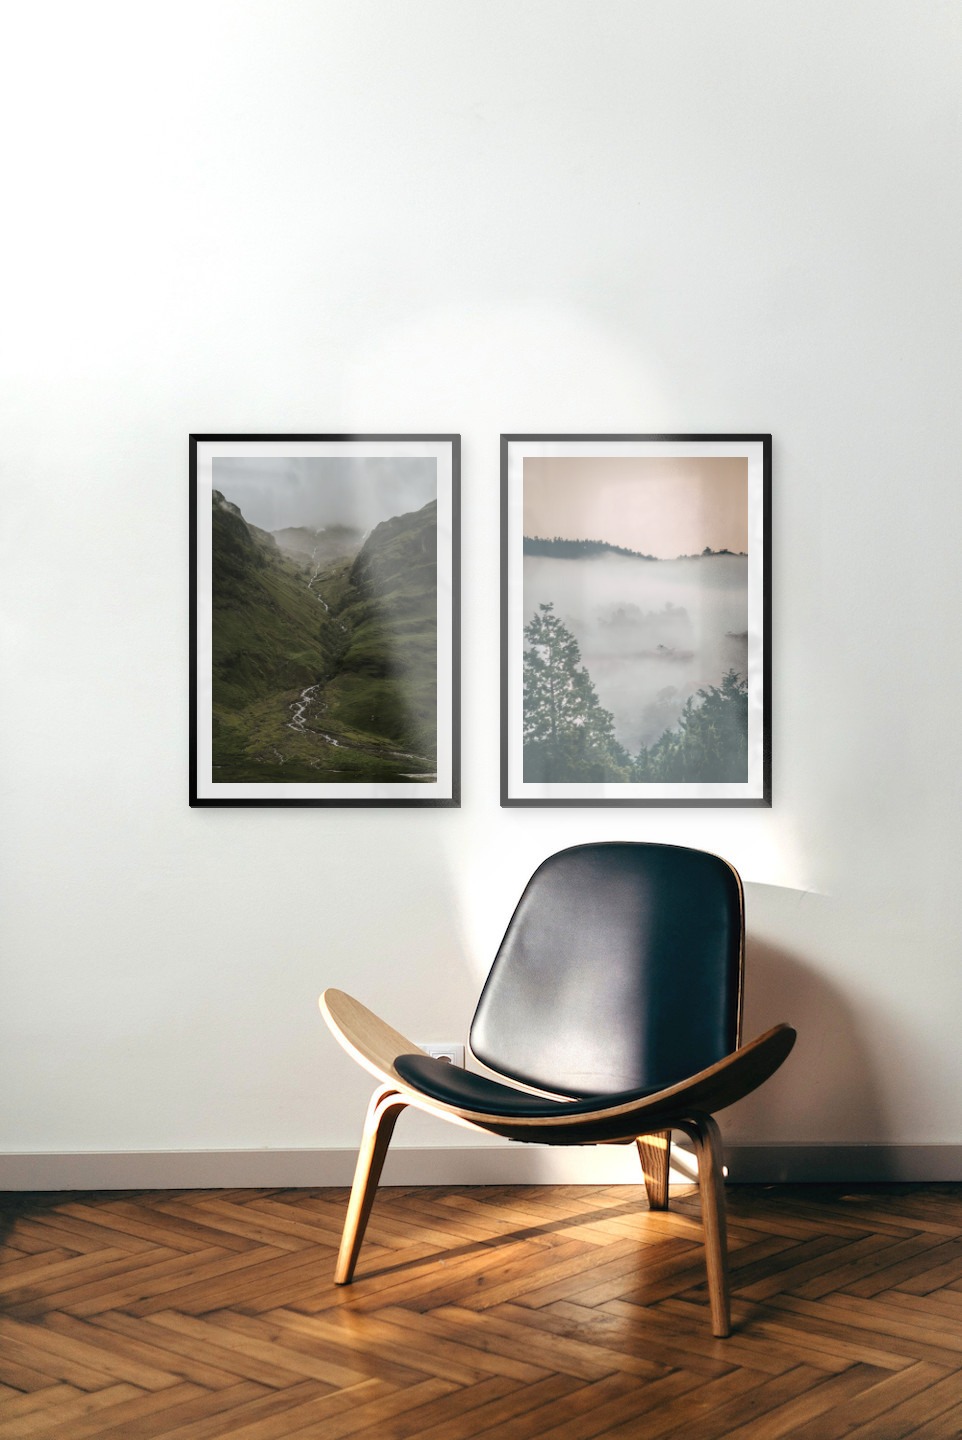 Gallery wall with picture frames in black in sizes 50x70 with prints "Stream in valley" and "Wooden tops and orange sky"